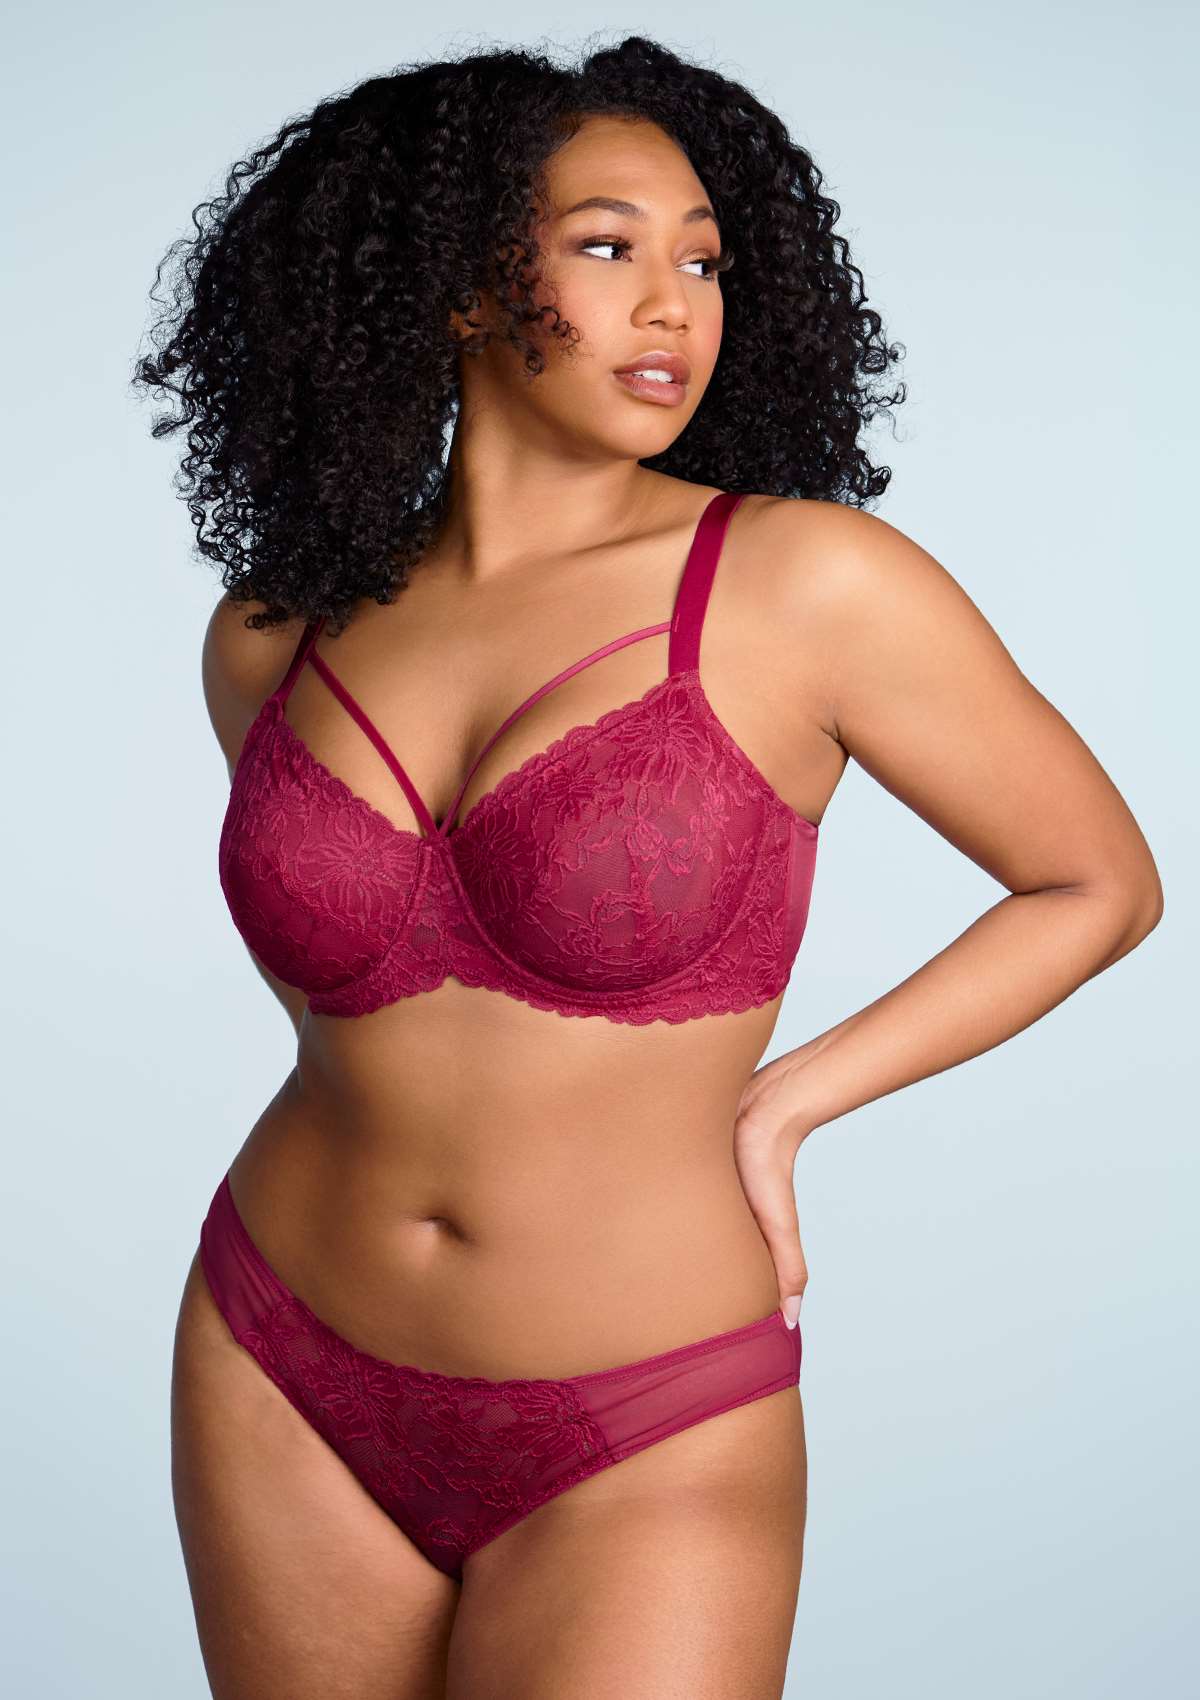 HSIA Pretty In Petals Lace Panties And Bra Set: Plus Size Women Bra - Red / 42 / DD/E